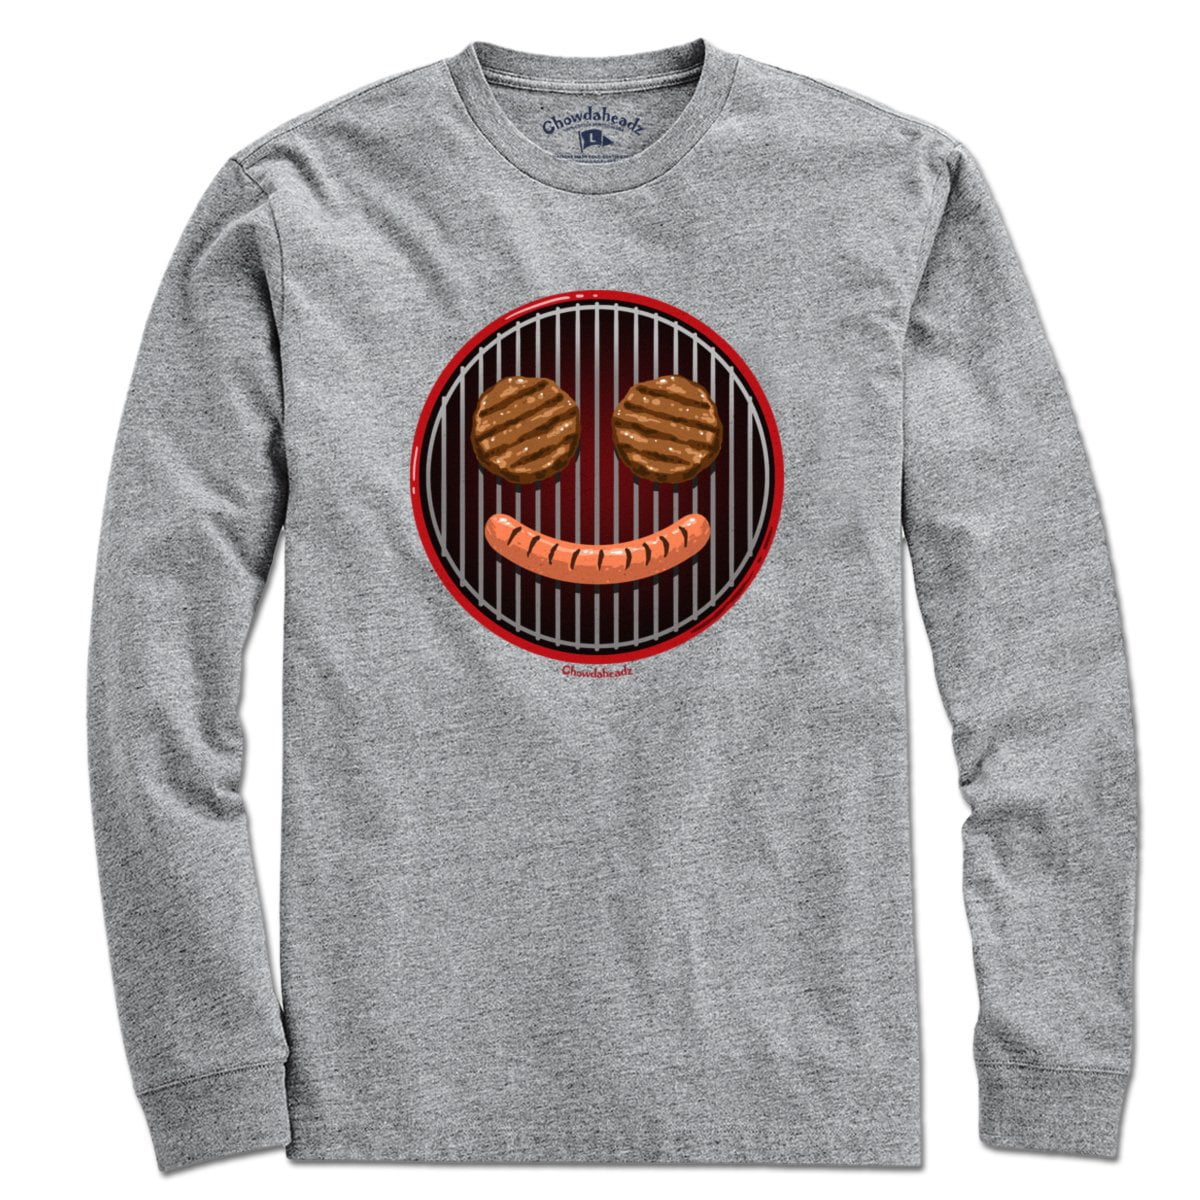 Smiley Face Grill T-Shirt - Chowdaheadz